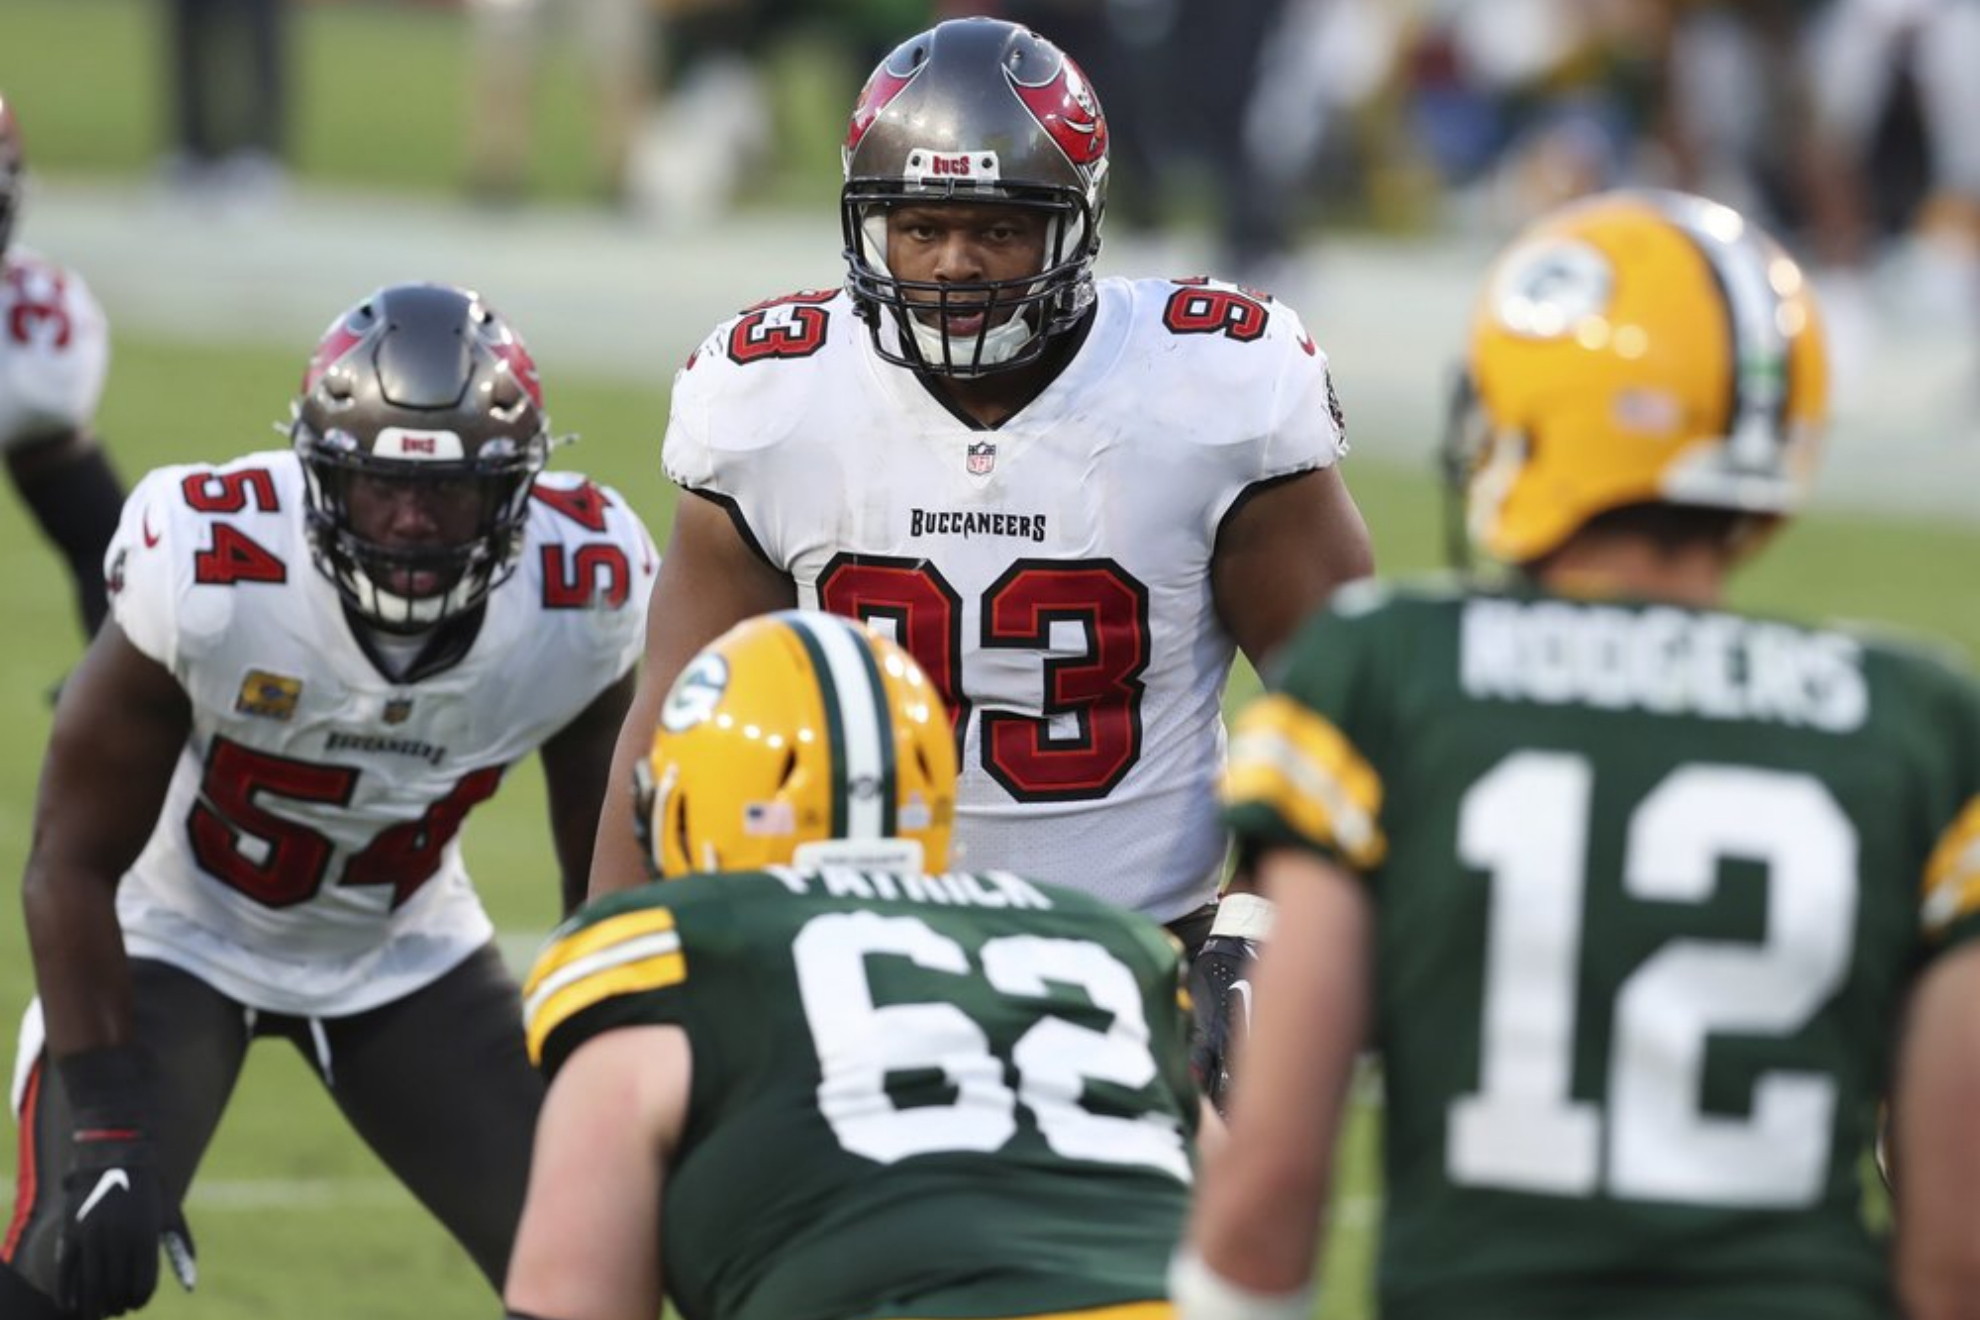 Tampa Bay Buccaneers defensive end Ndamukong Suh (93) lines up against the Green Bay Packers.